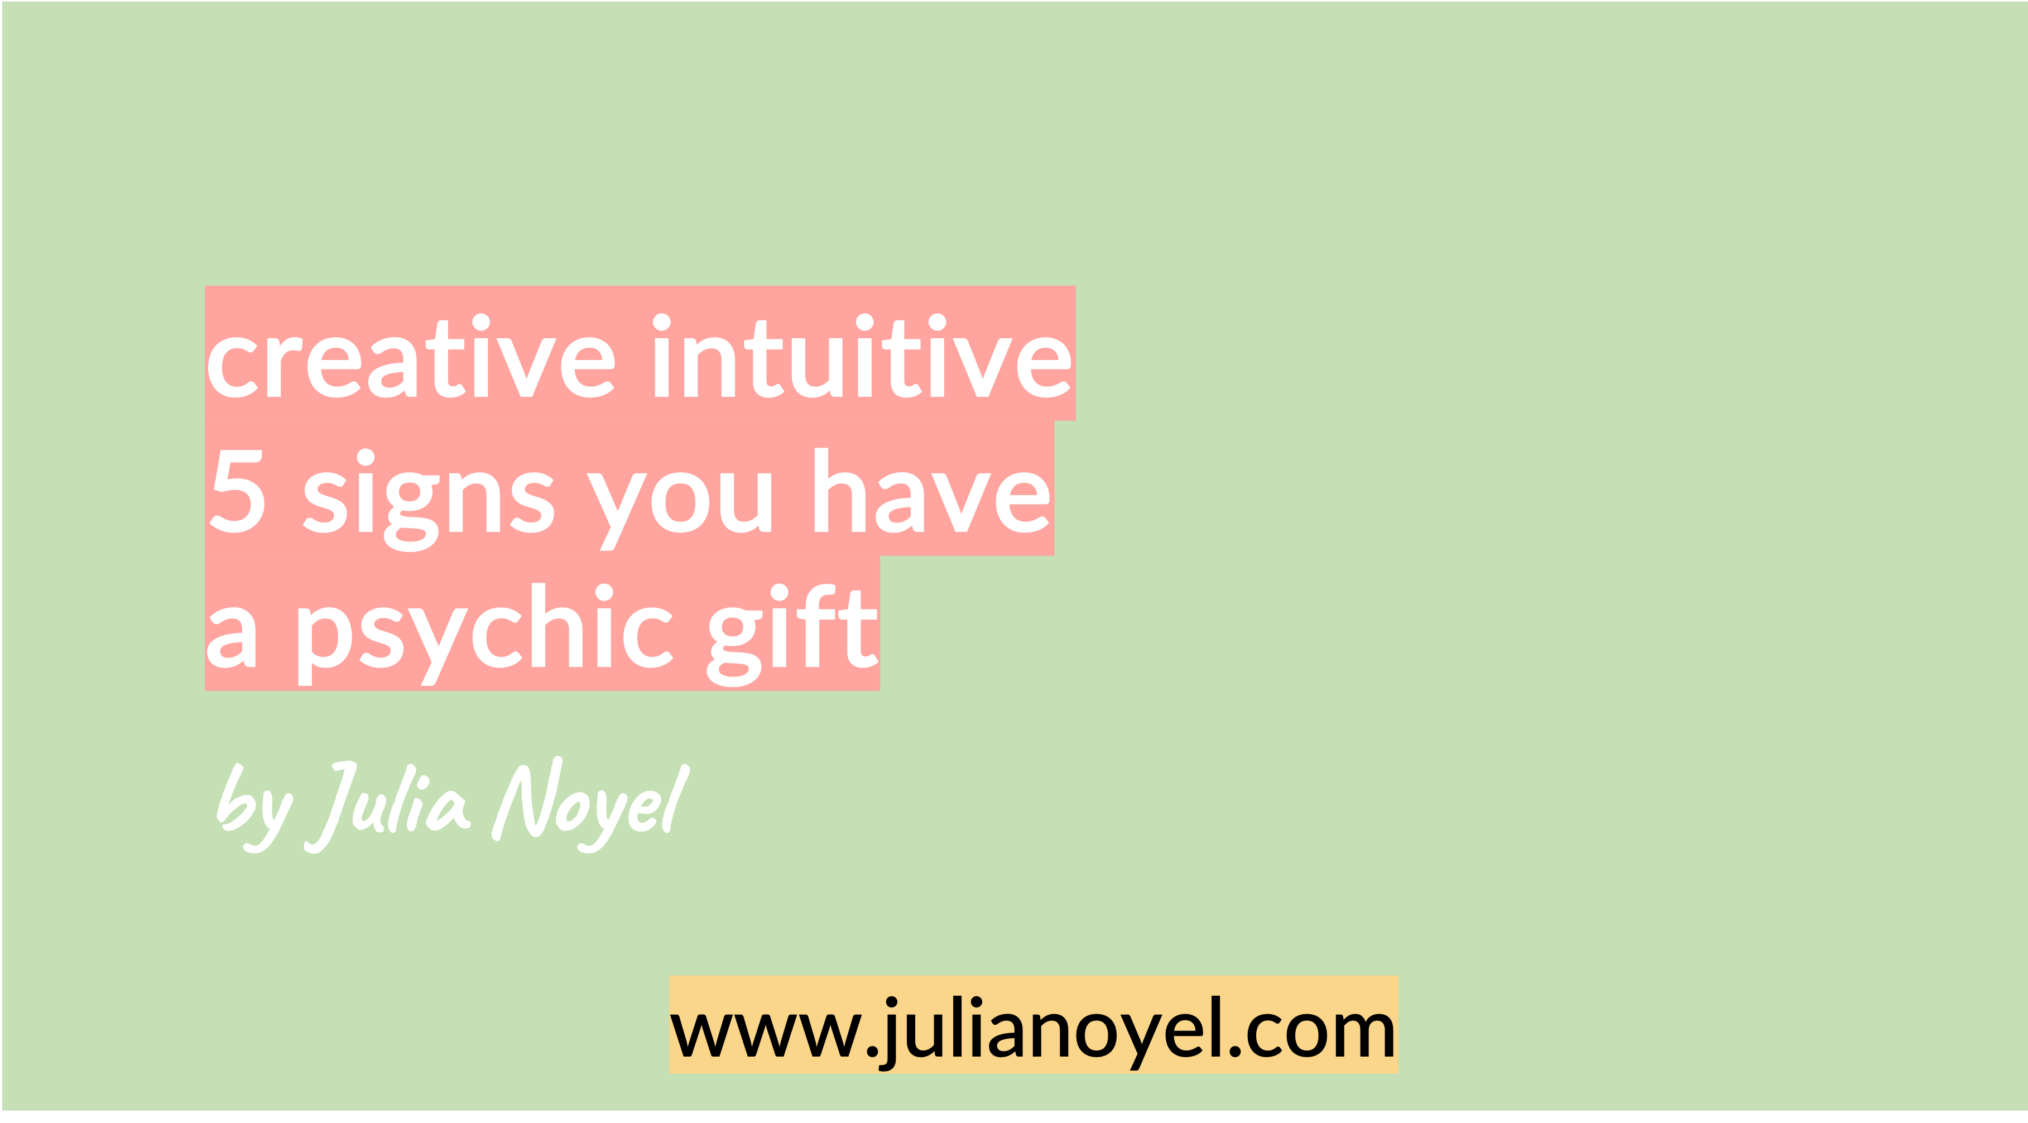 creative intuitive 5 signs you have a psychic gift